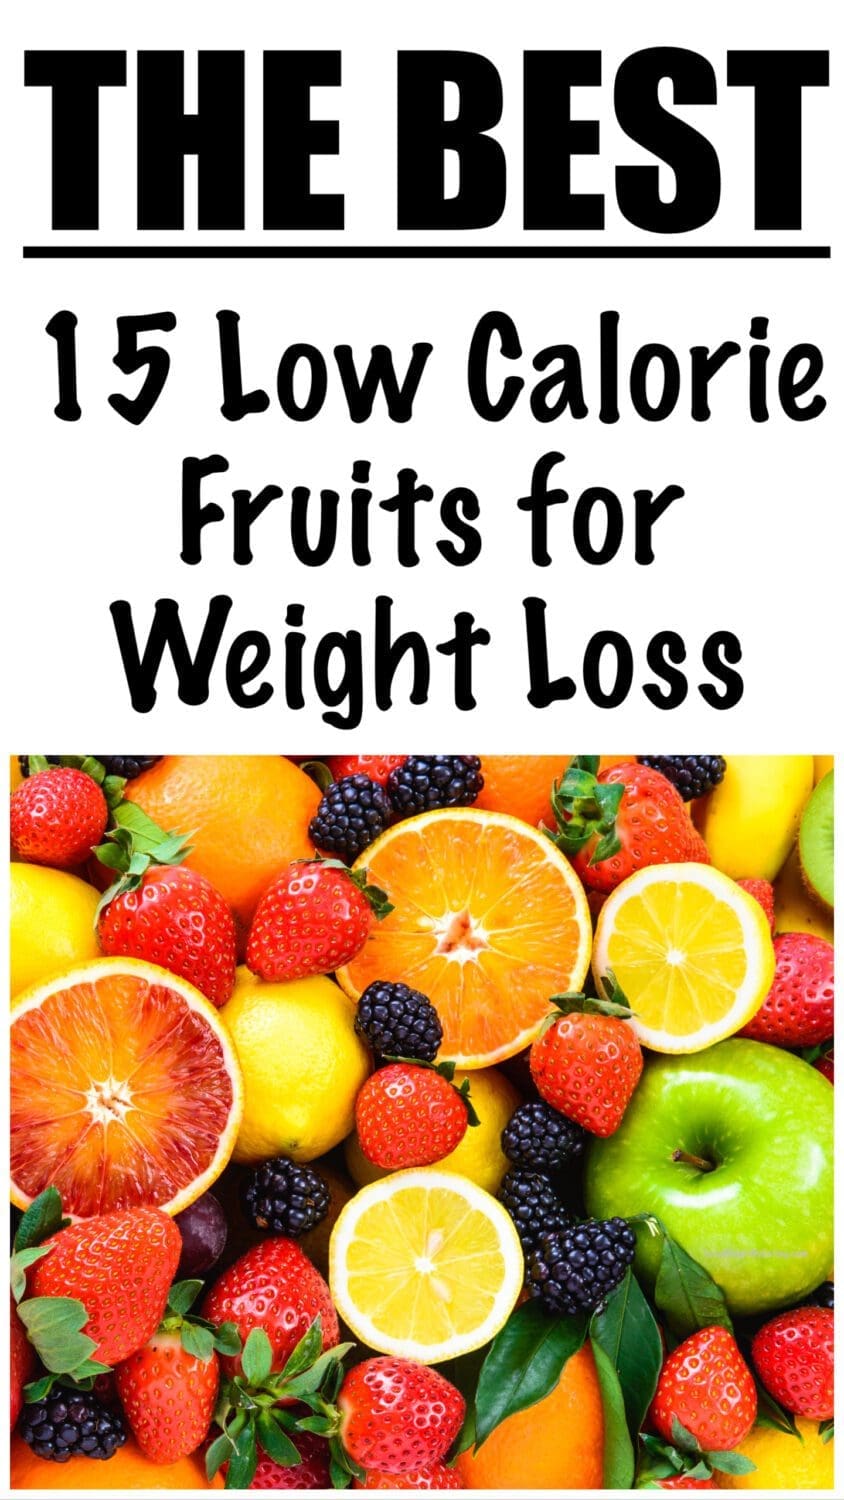 15 Best Low Calorie Fruits for Weight Loss